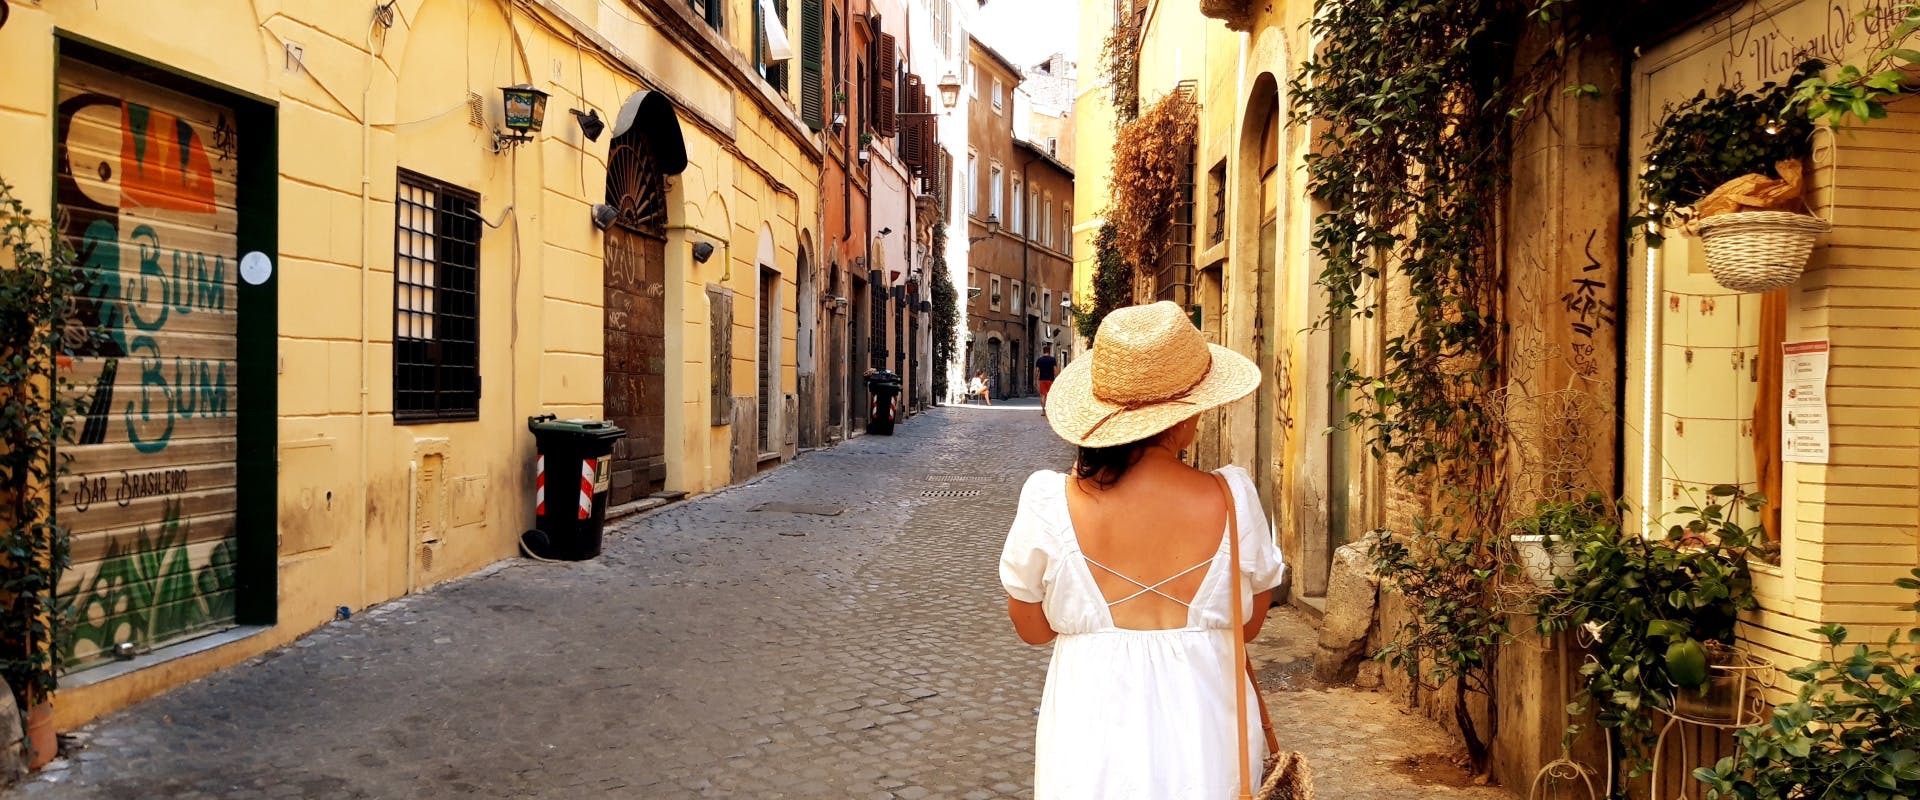 A woman walks through the streets of Italy.